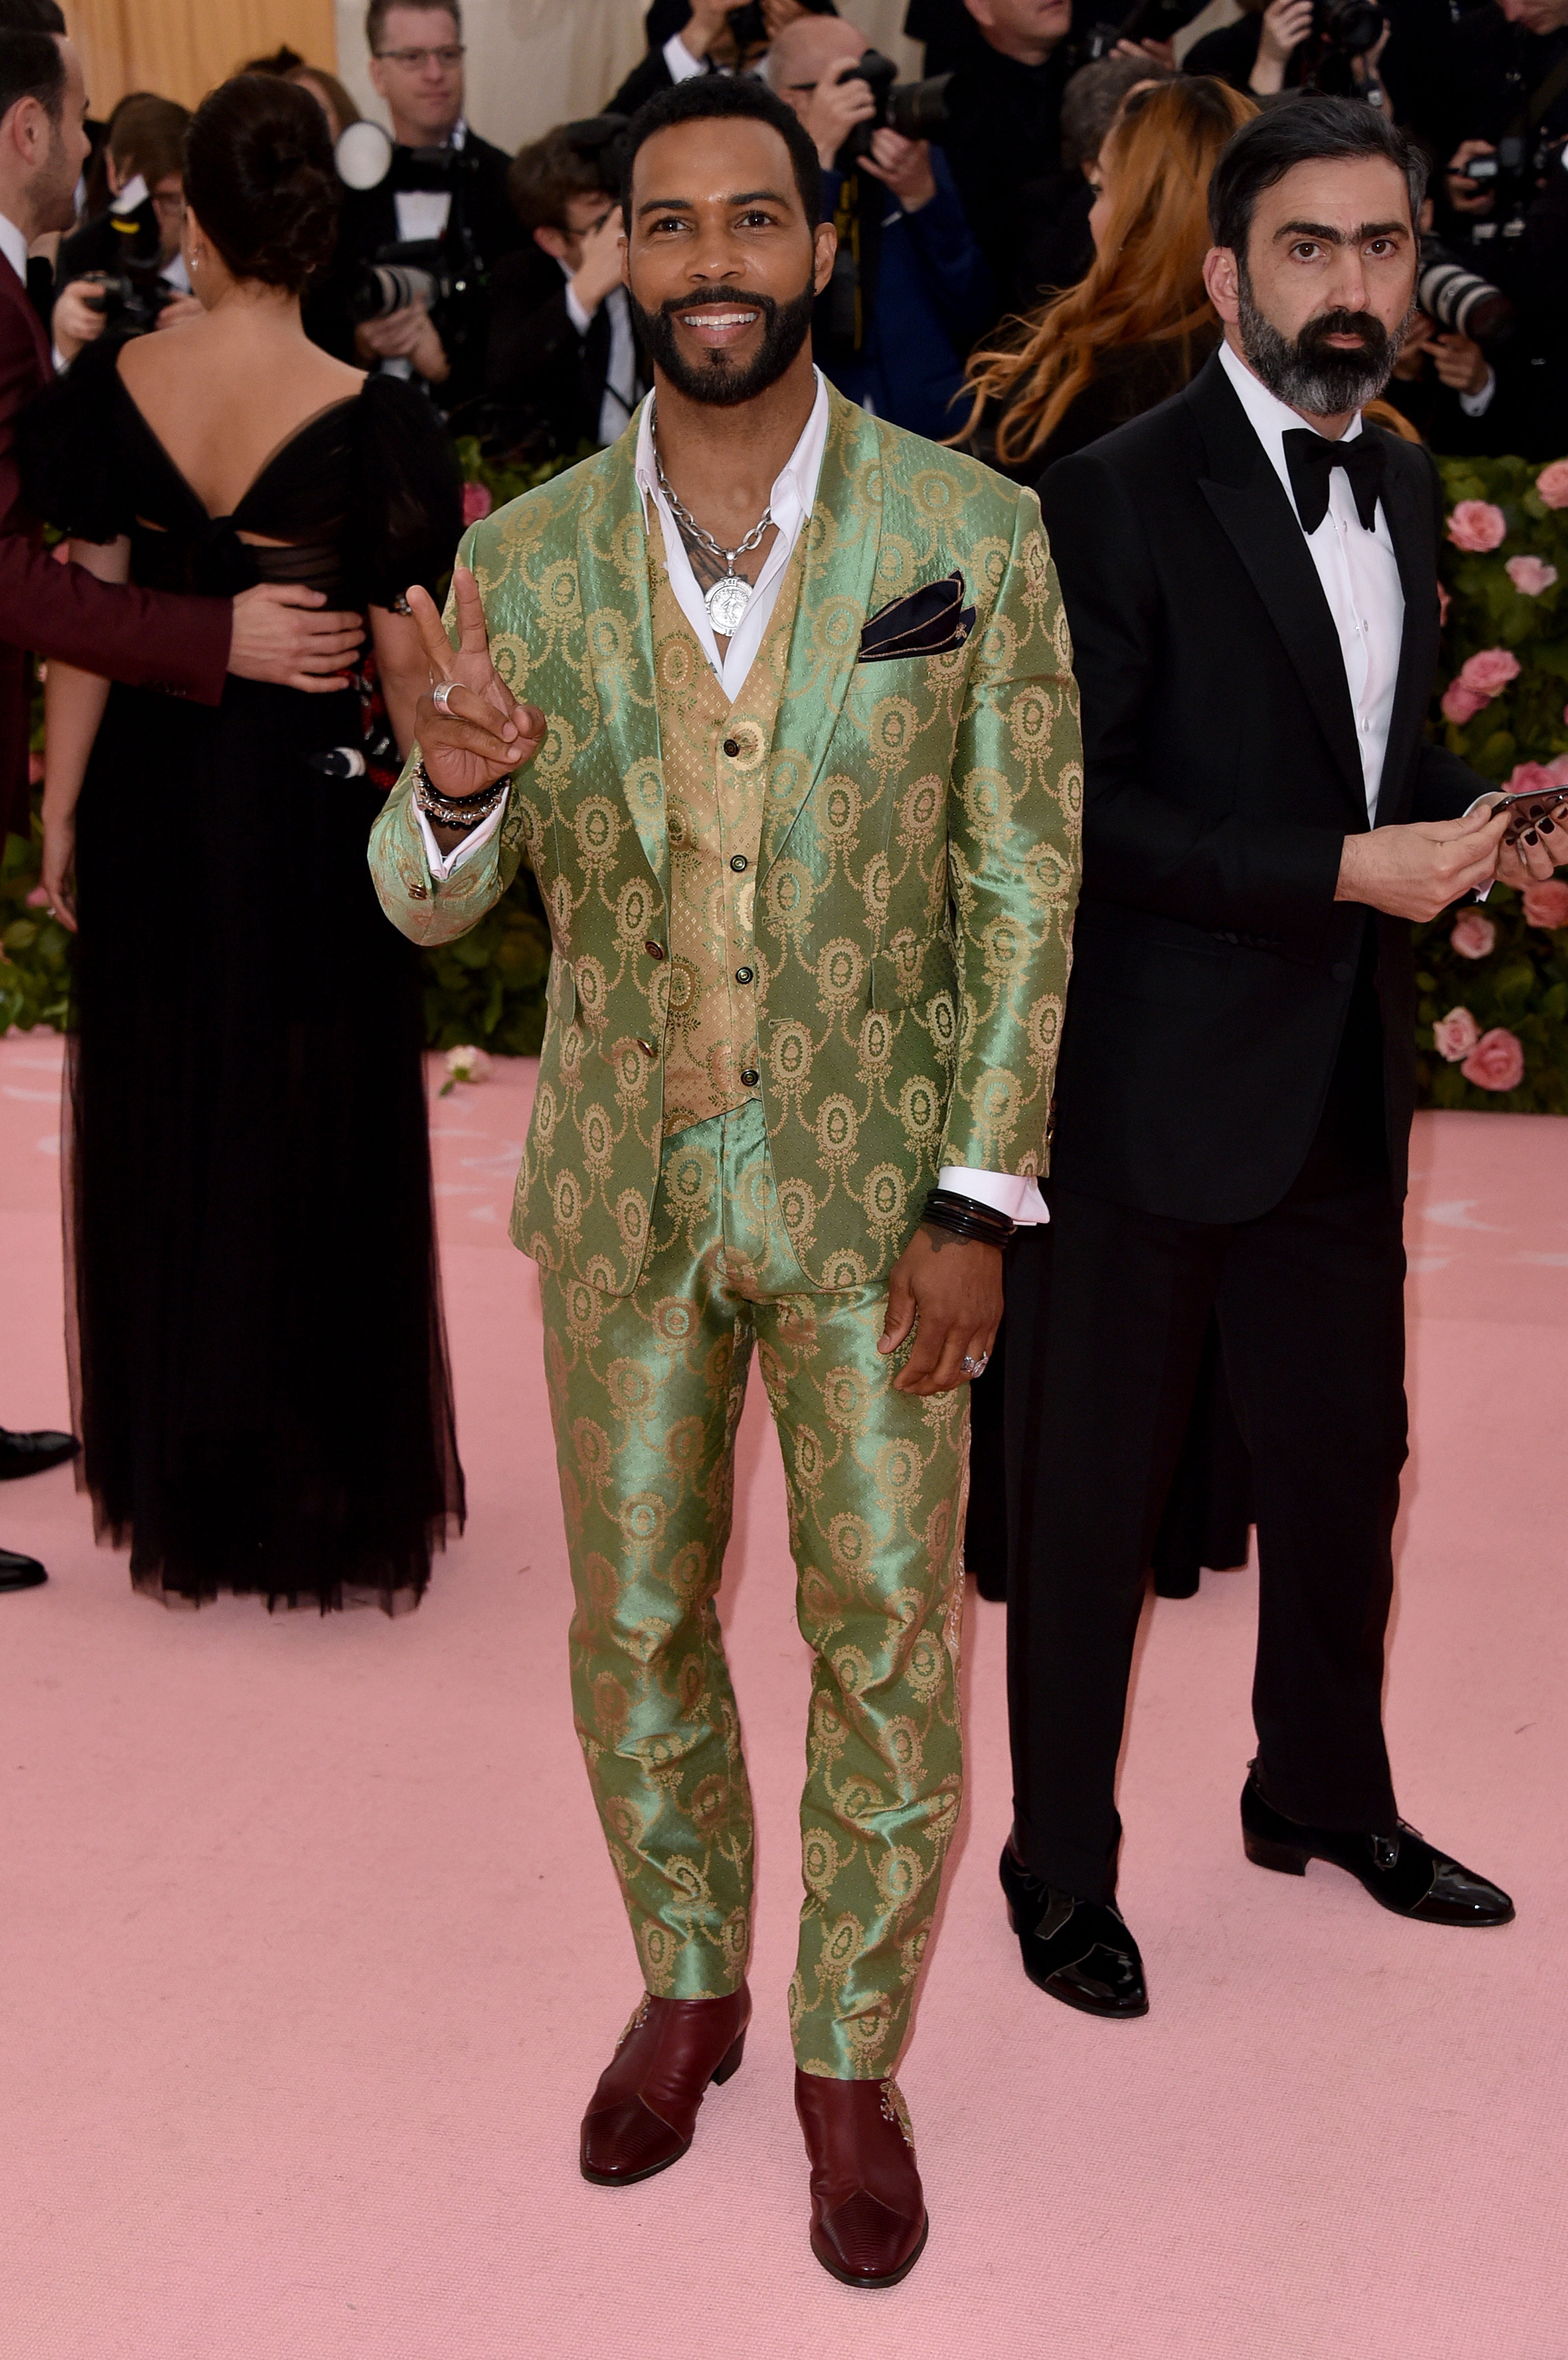 21 Savage Hits His First Met Gala Wearing a Piece of Hip-Hop History